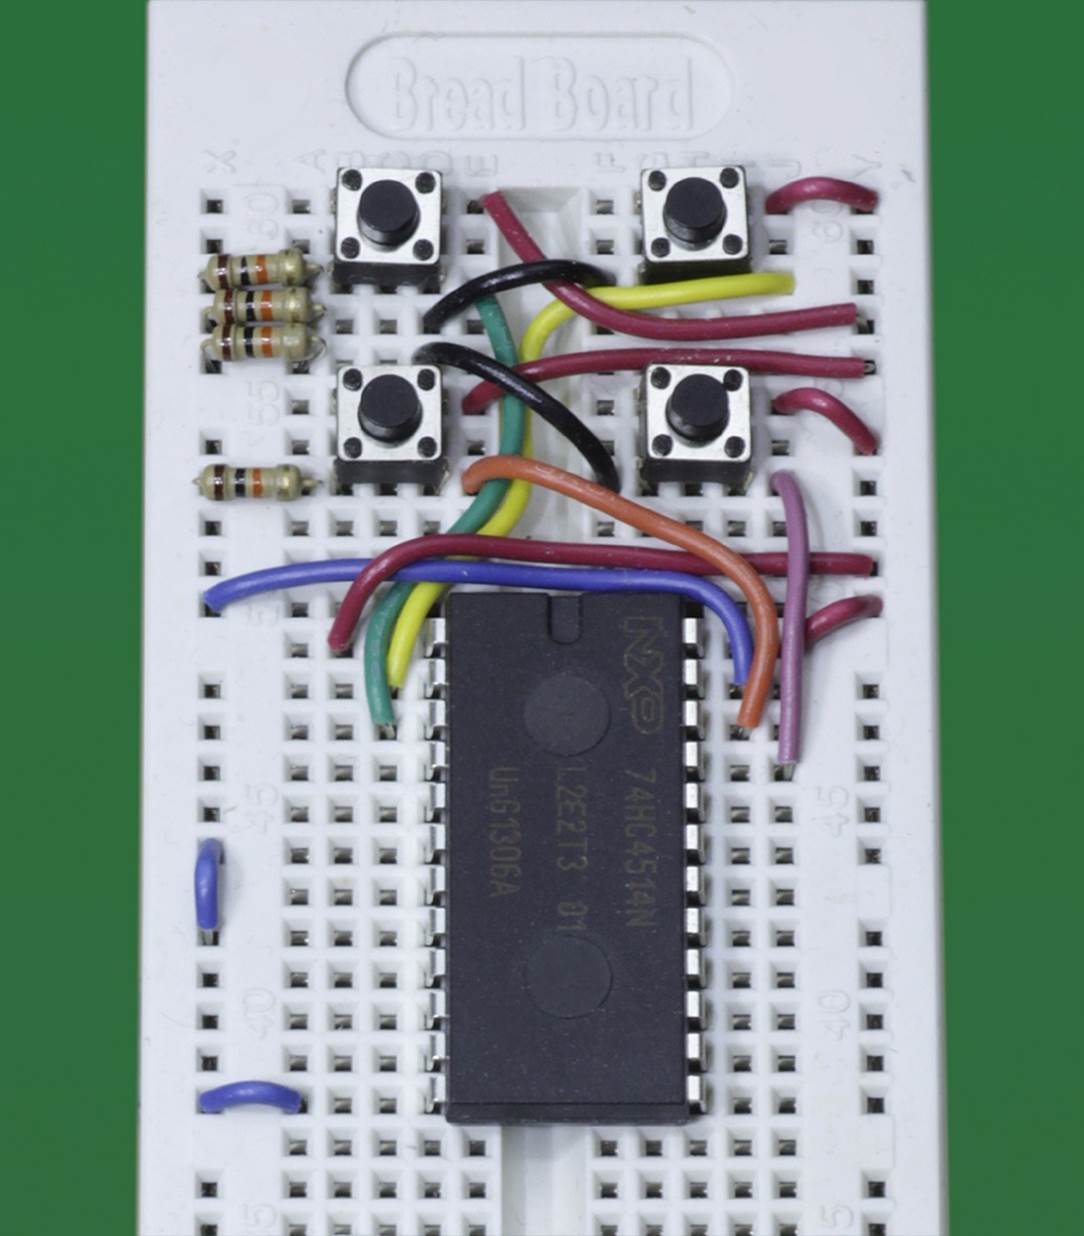 The breadboarded version of the decoder test circuit. Decoder chips from some manufacturers may be narrower than the one shown here, but the functionality is the same.